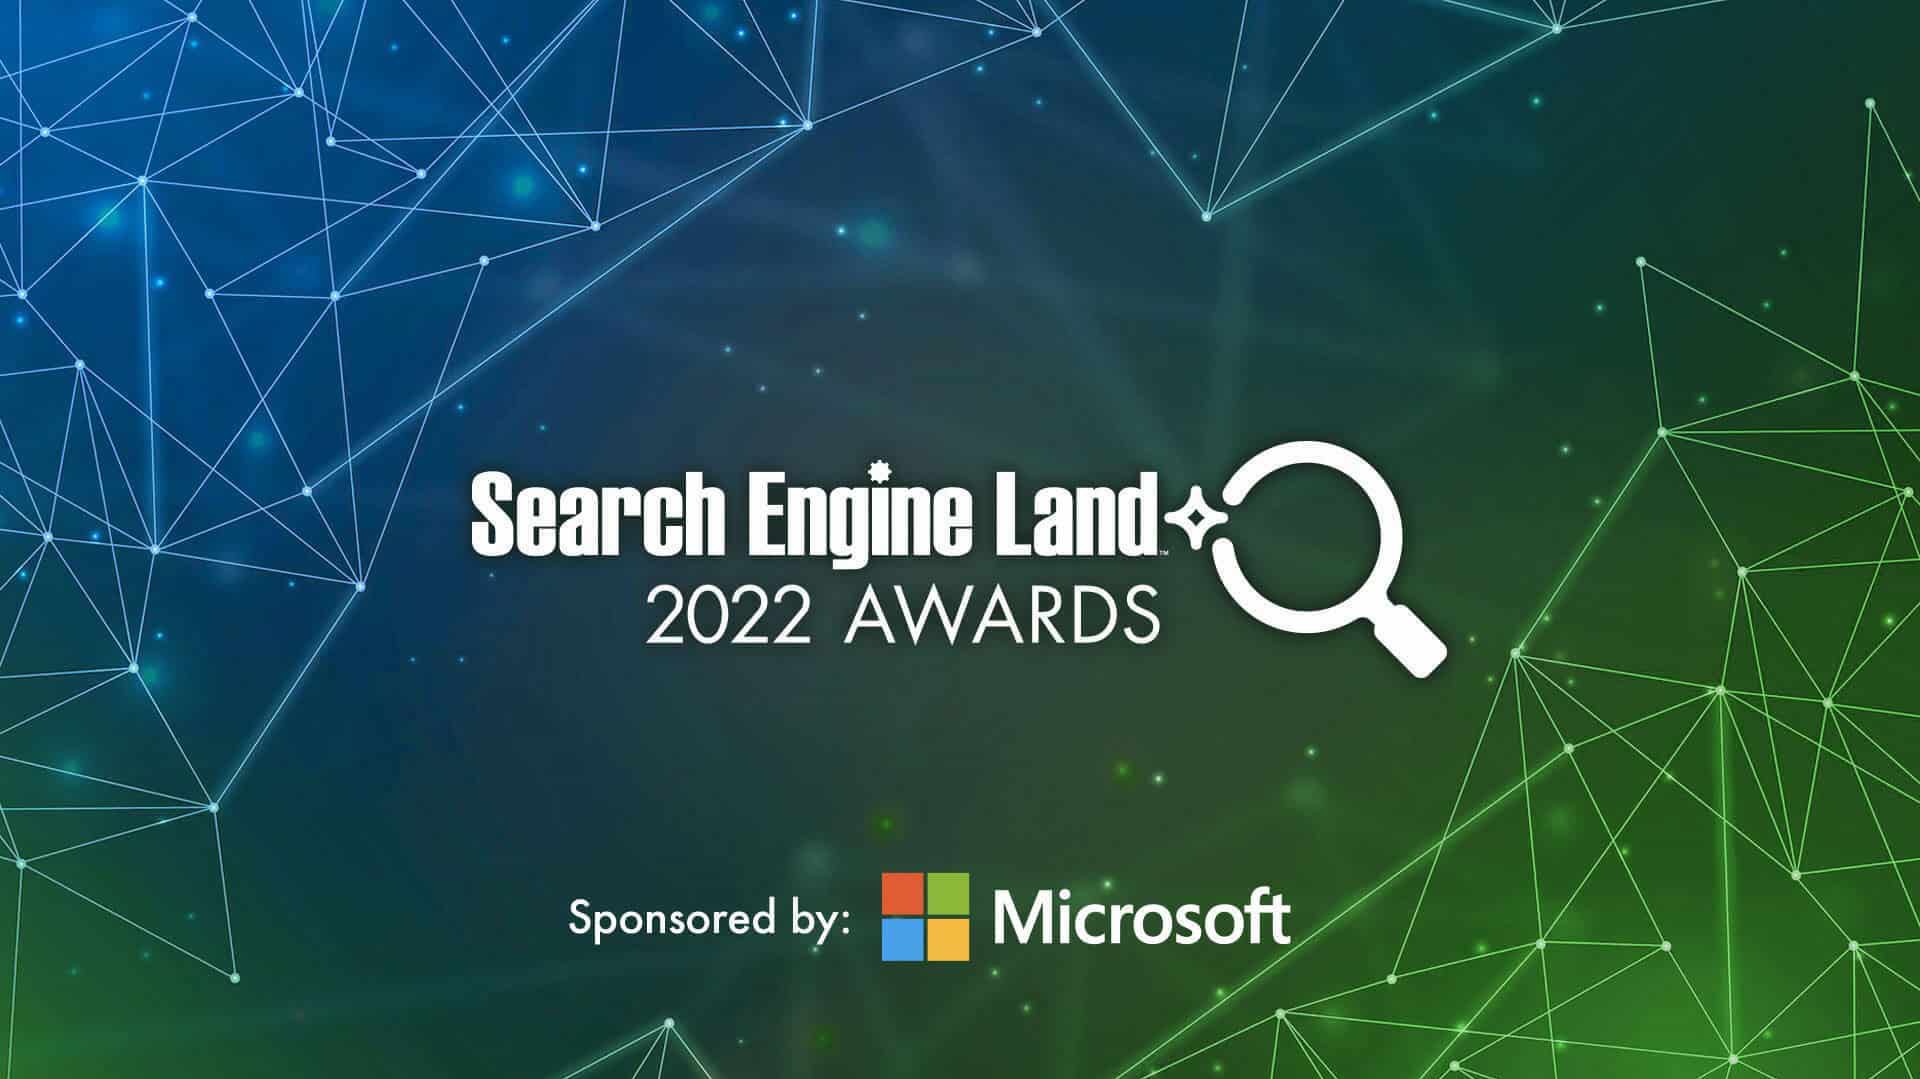 Search Engine Land 2022 awards